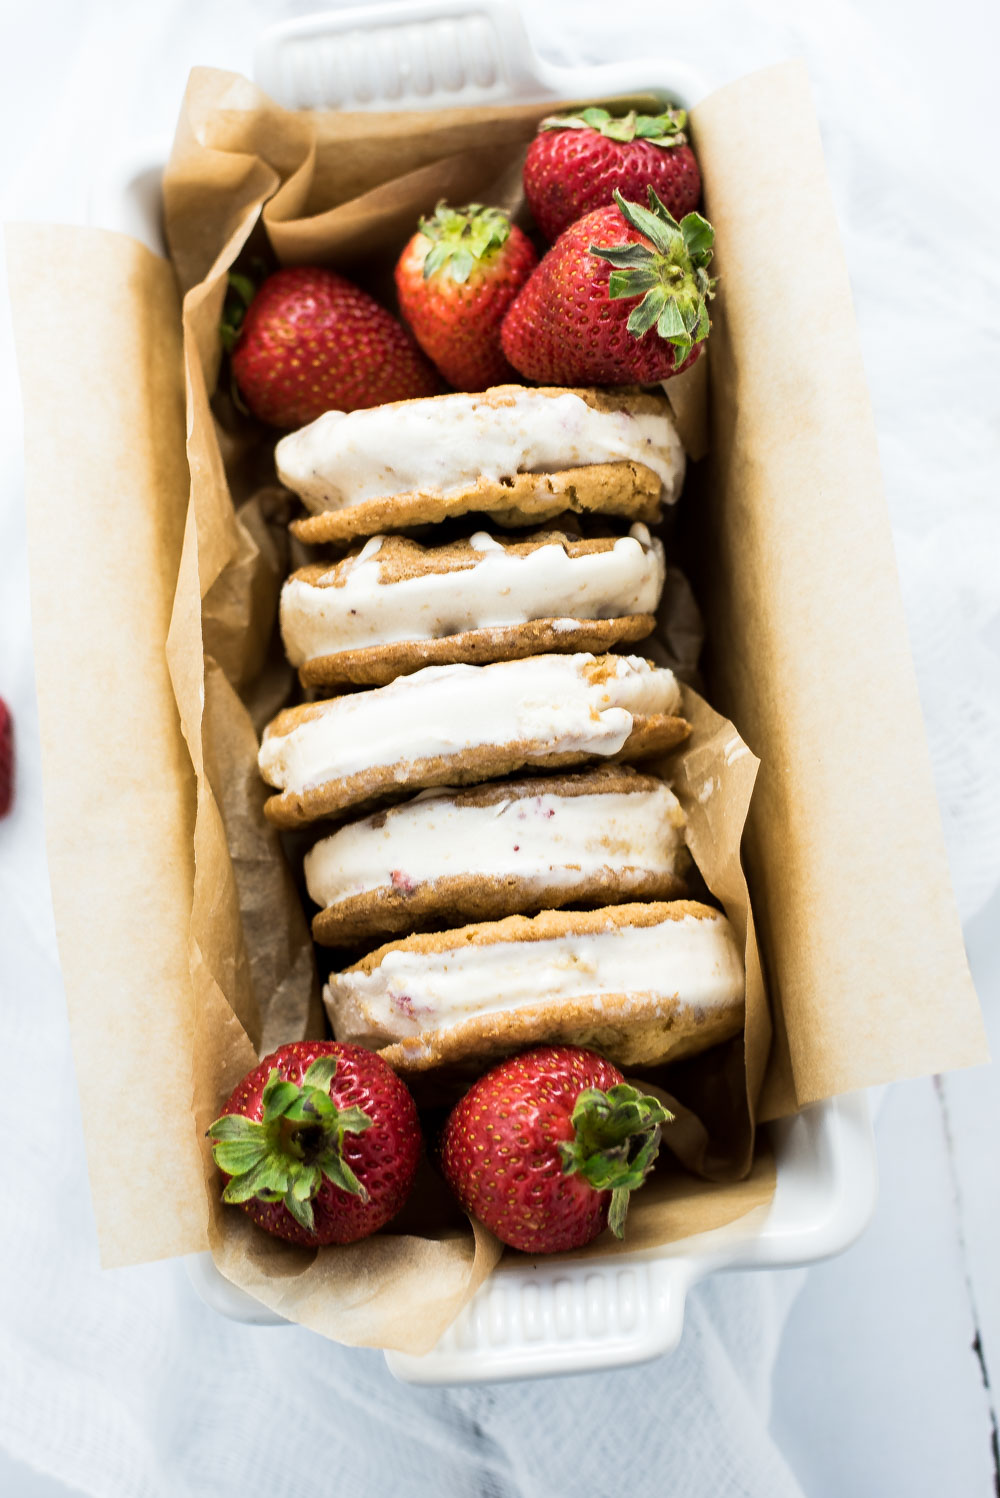 Strawberry Ice Cream Sandwiches are a refreshing way to cool down this summer!